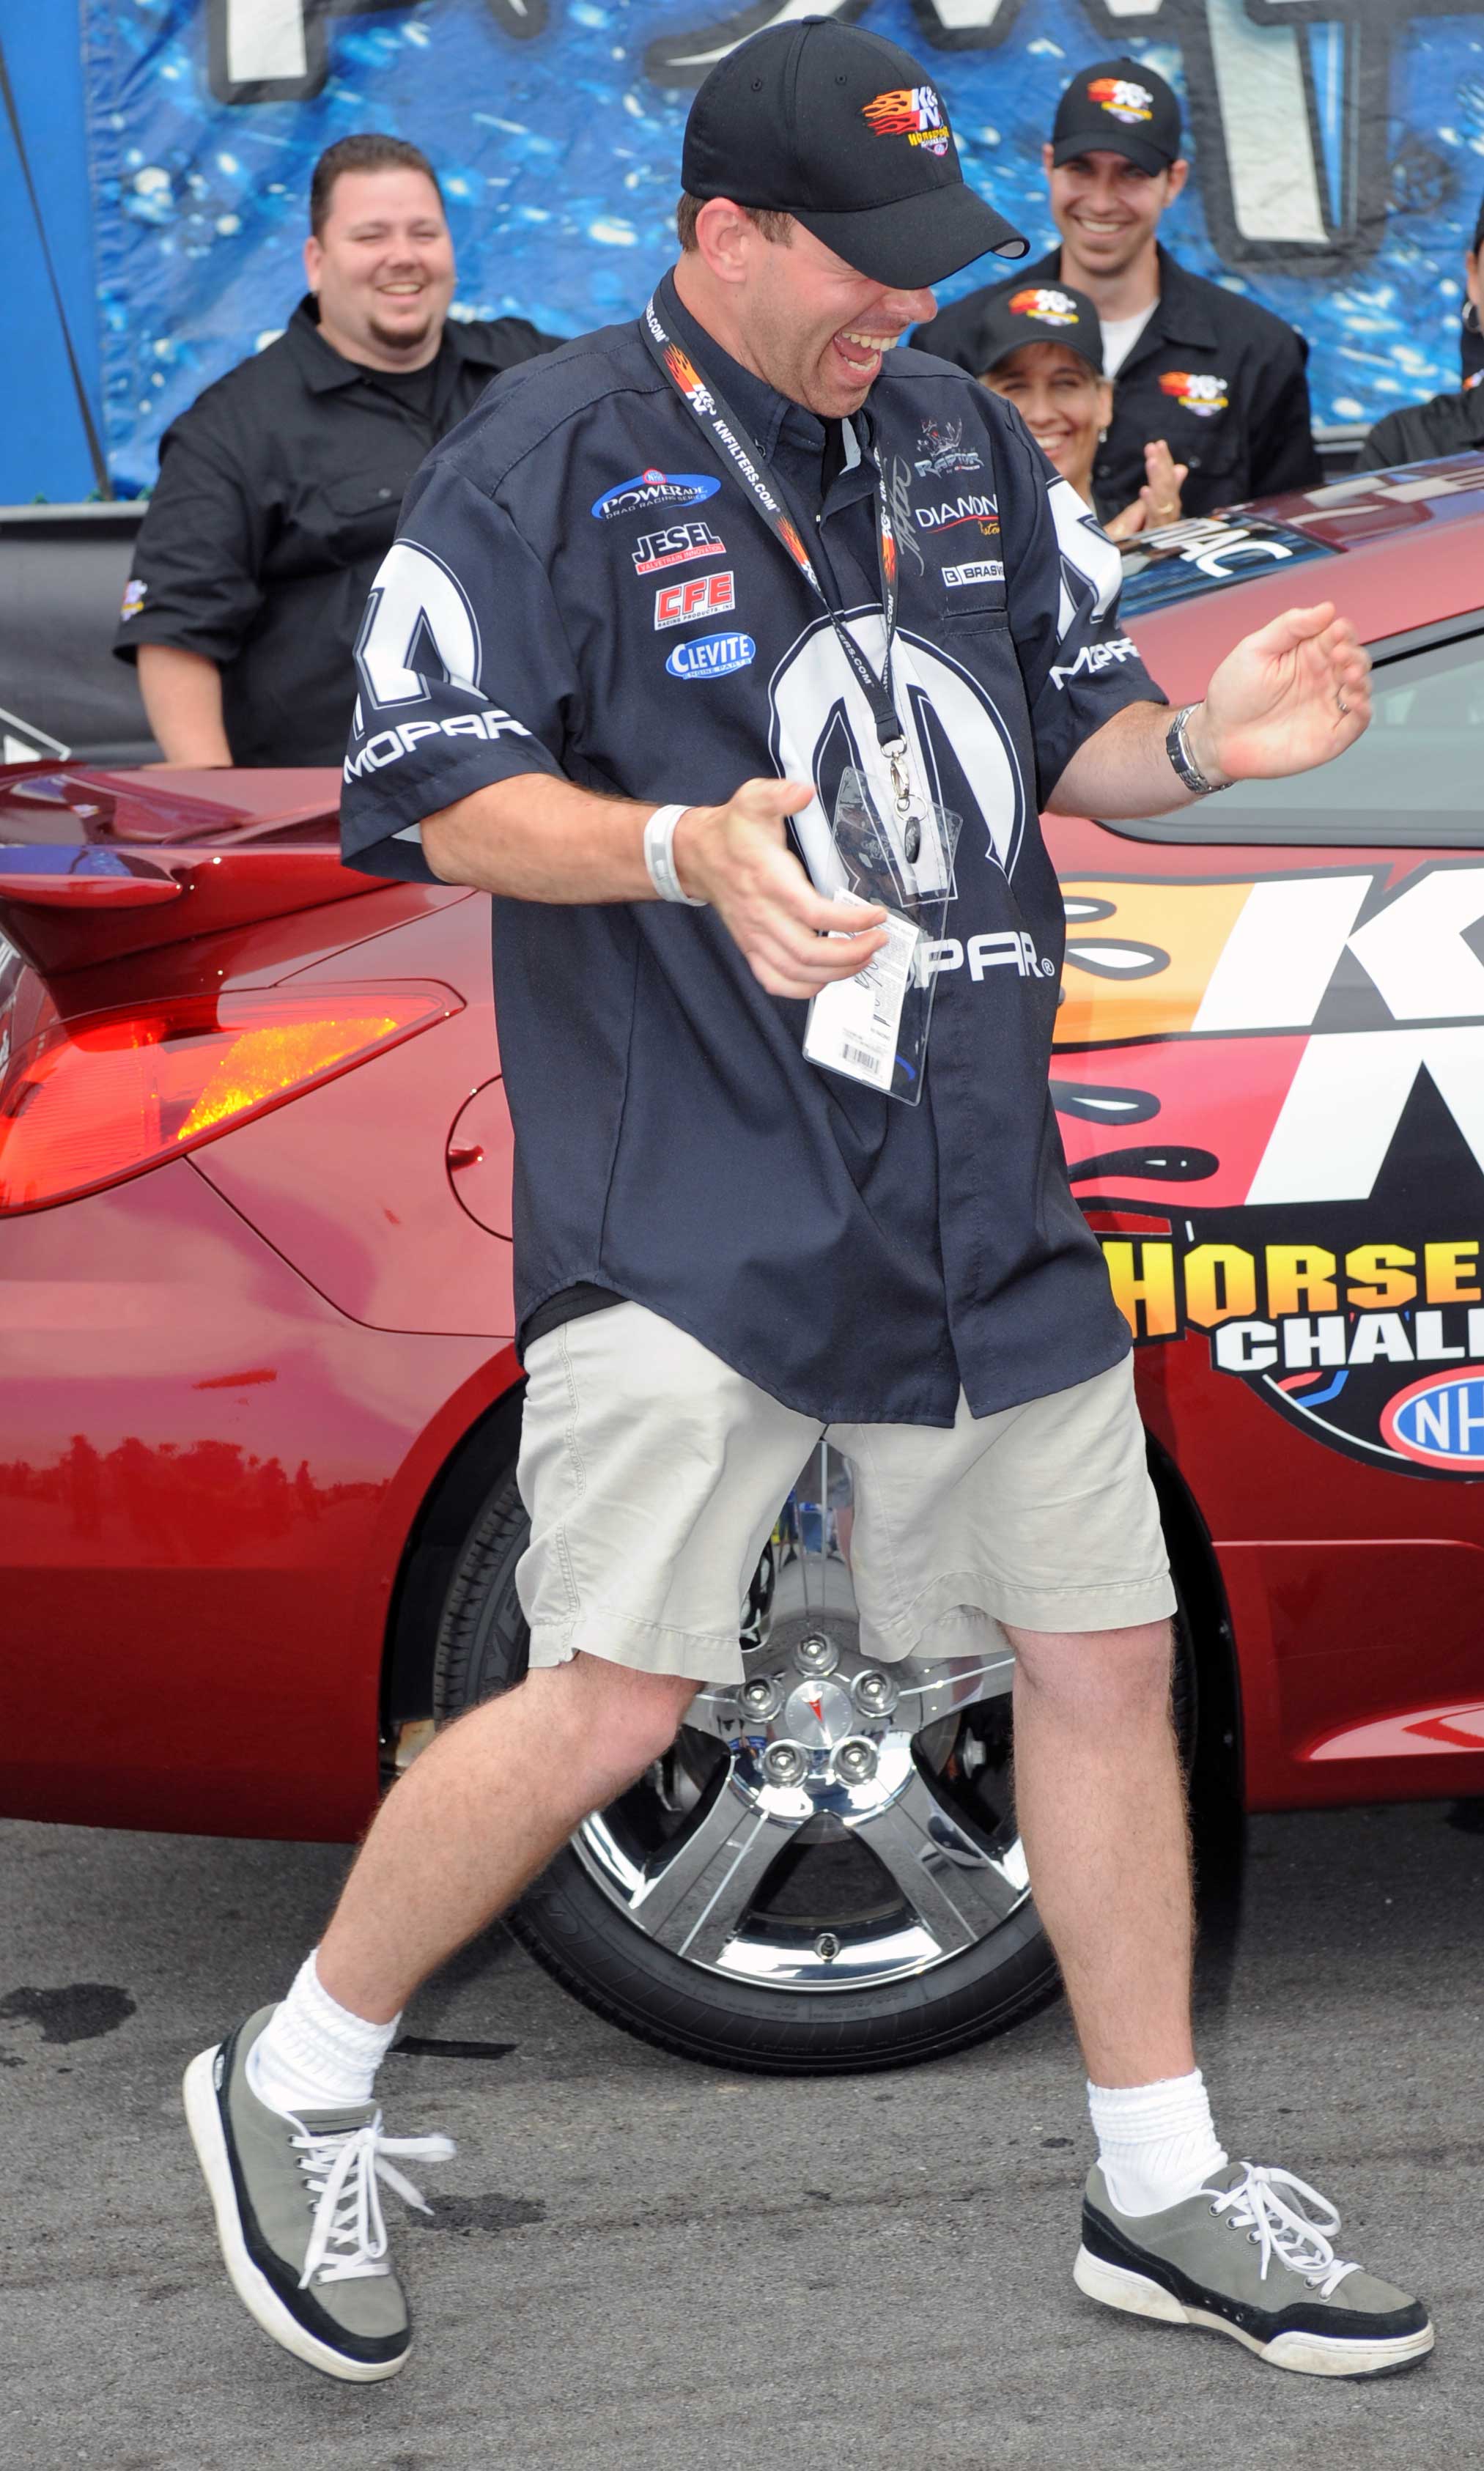 Edward Merry, Jr. Dances with Joy After Winning Pontiac GXP Coupe in K&N Engineering Horsepower Challenge Sweepstakes